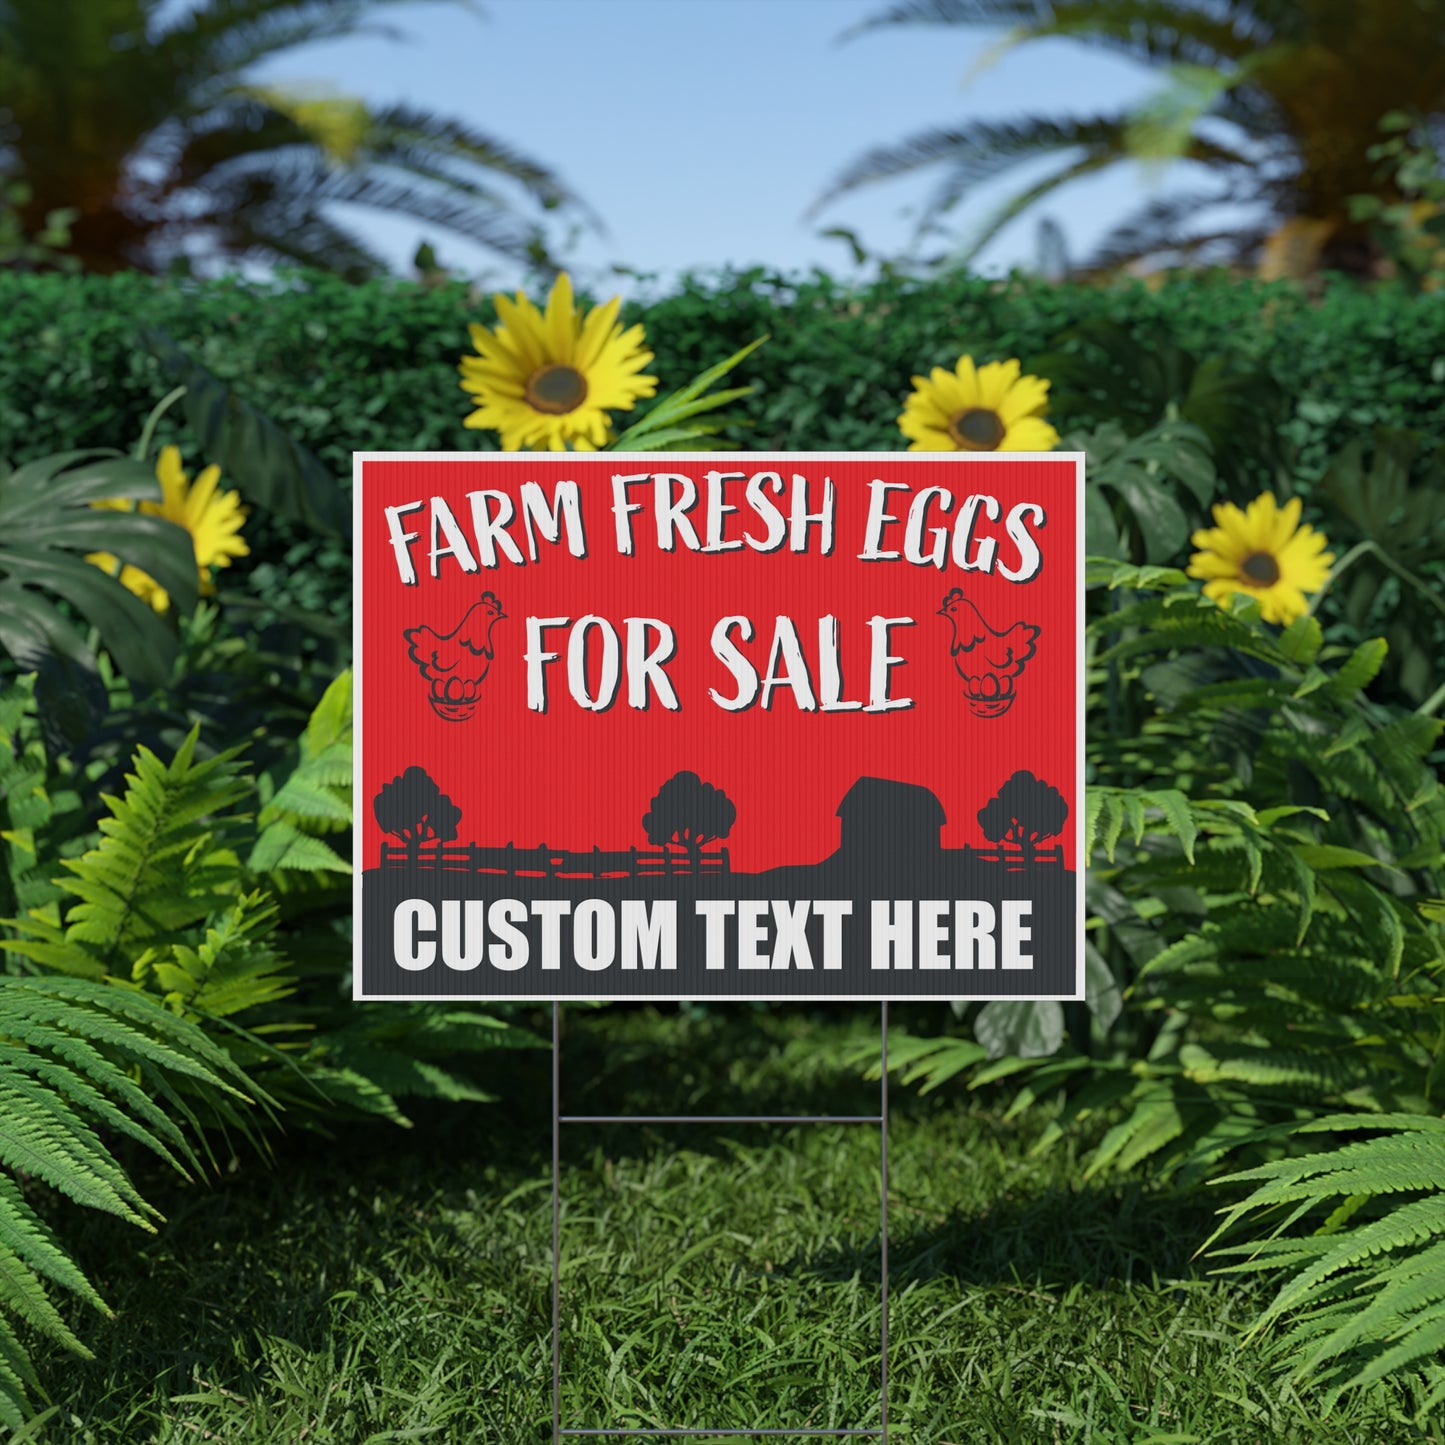 Custom Farm Fresh Eggs For Sale Yard Sign 24 x 36-inch (Outdoor, Weatherproof Corrugated Plastic) Metal H-Stake Included v2_Red